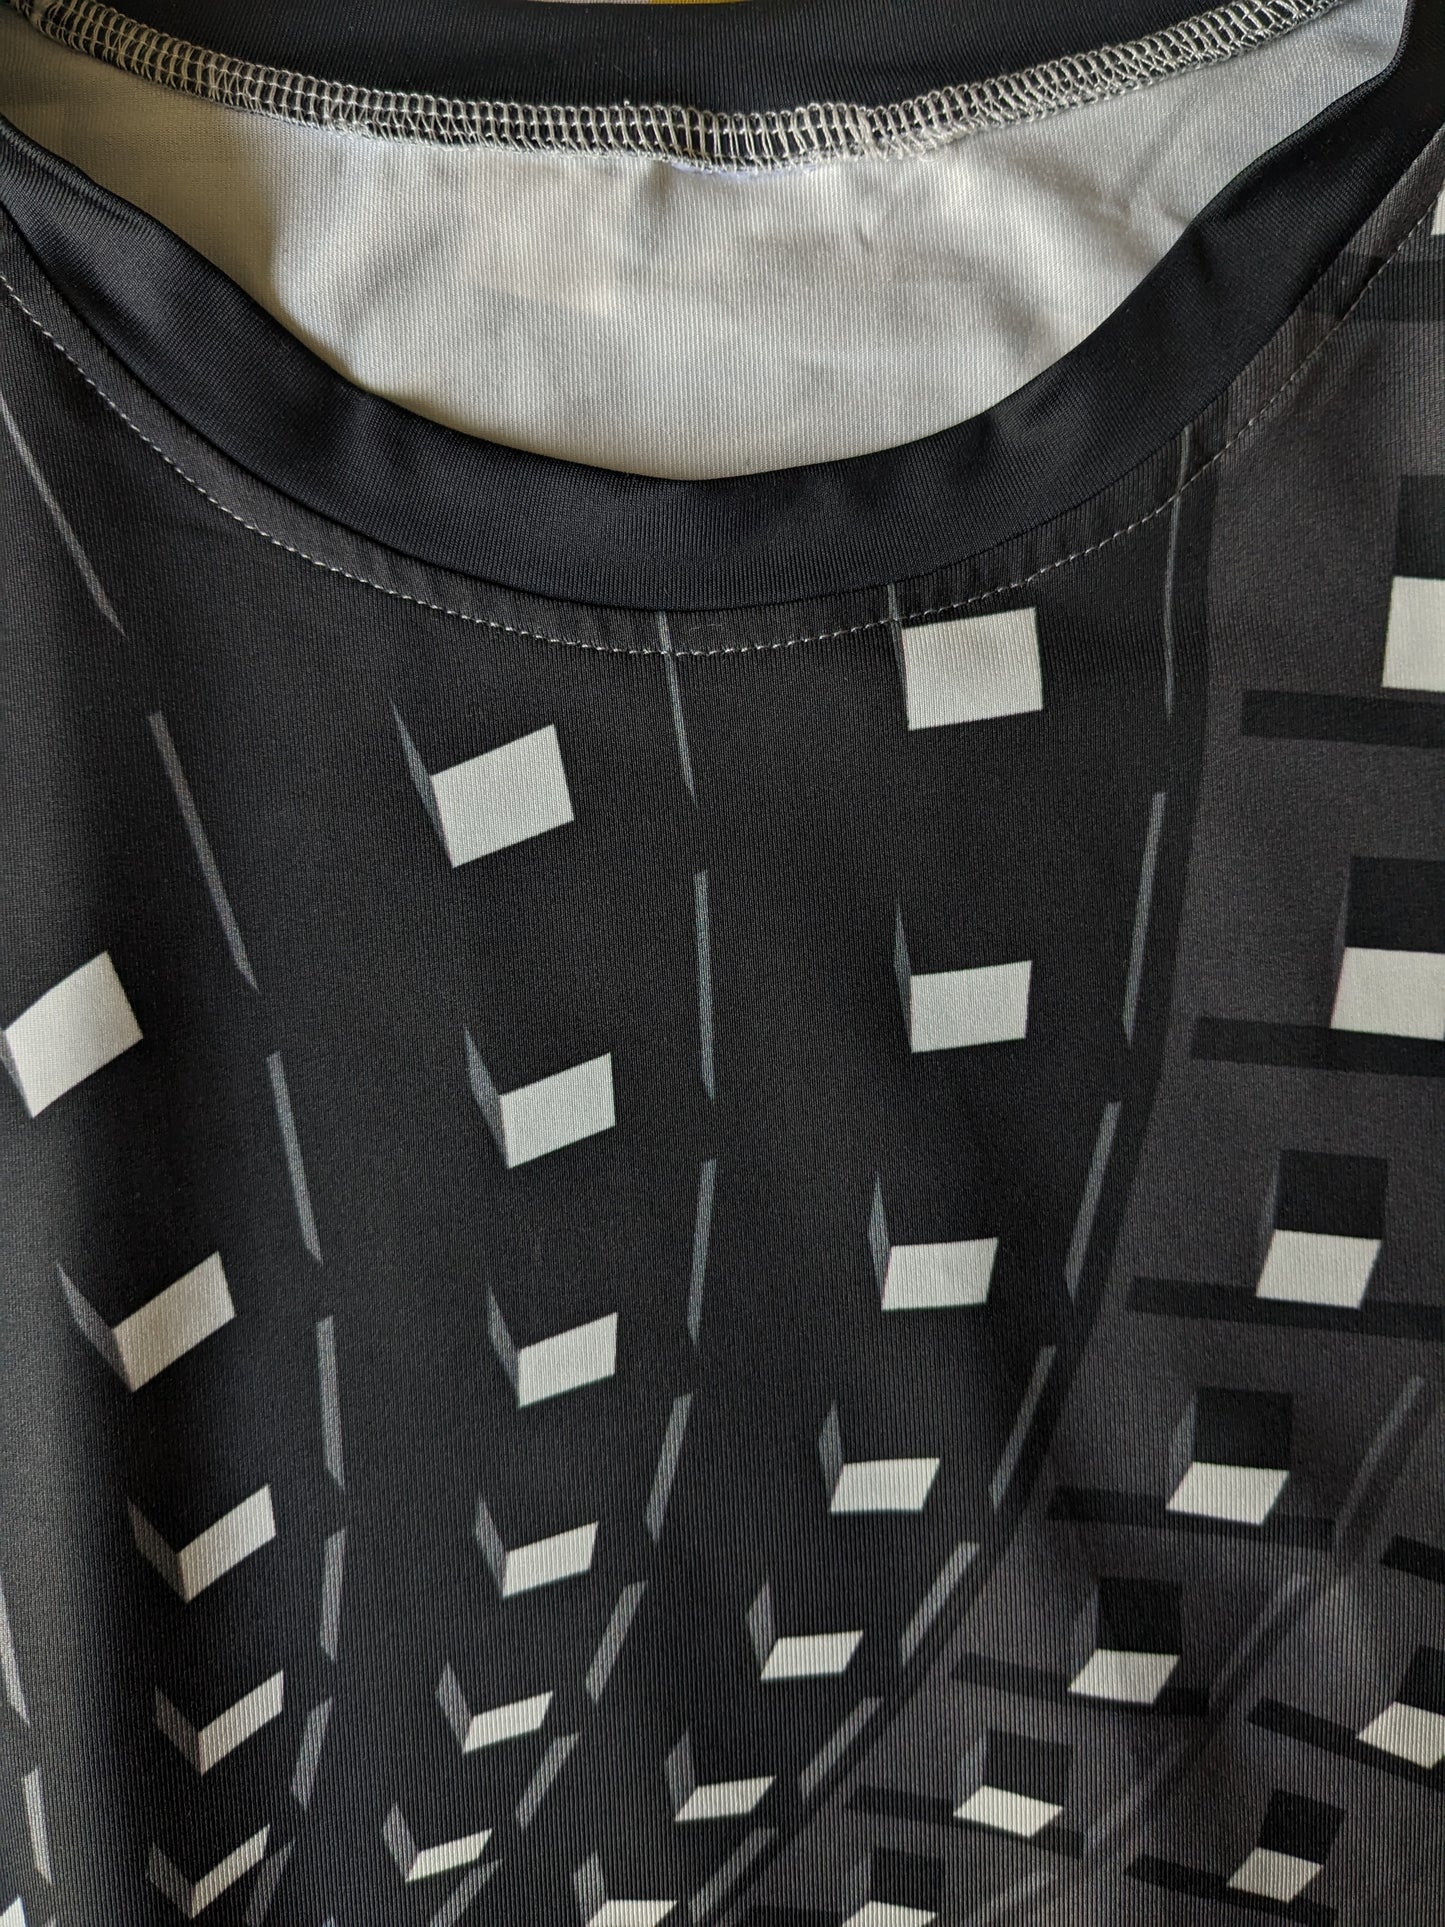 Retro Maced Print shirt. Gray black and white colored. Size L. Stretch.